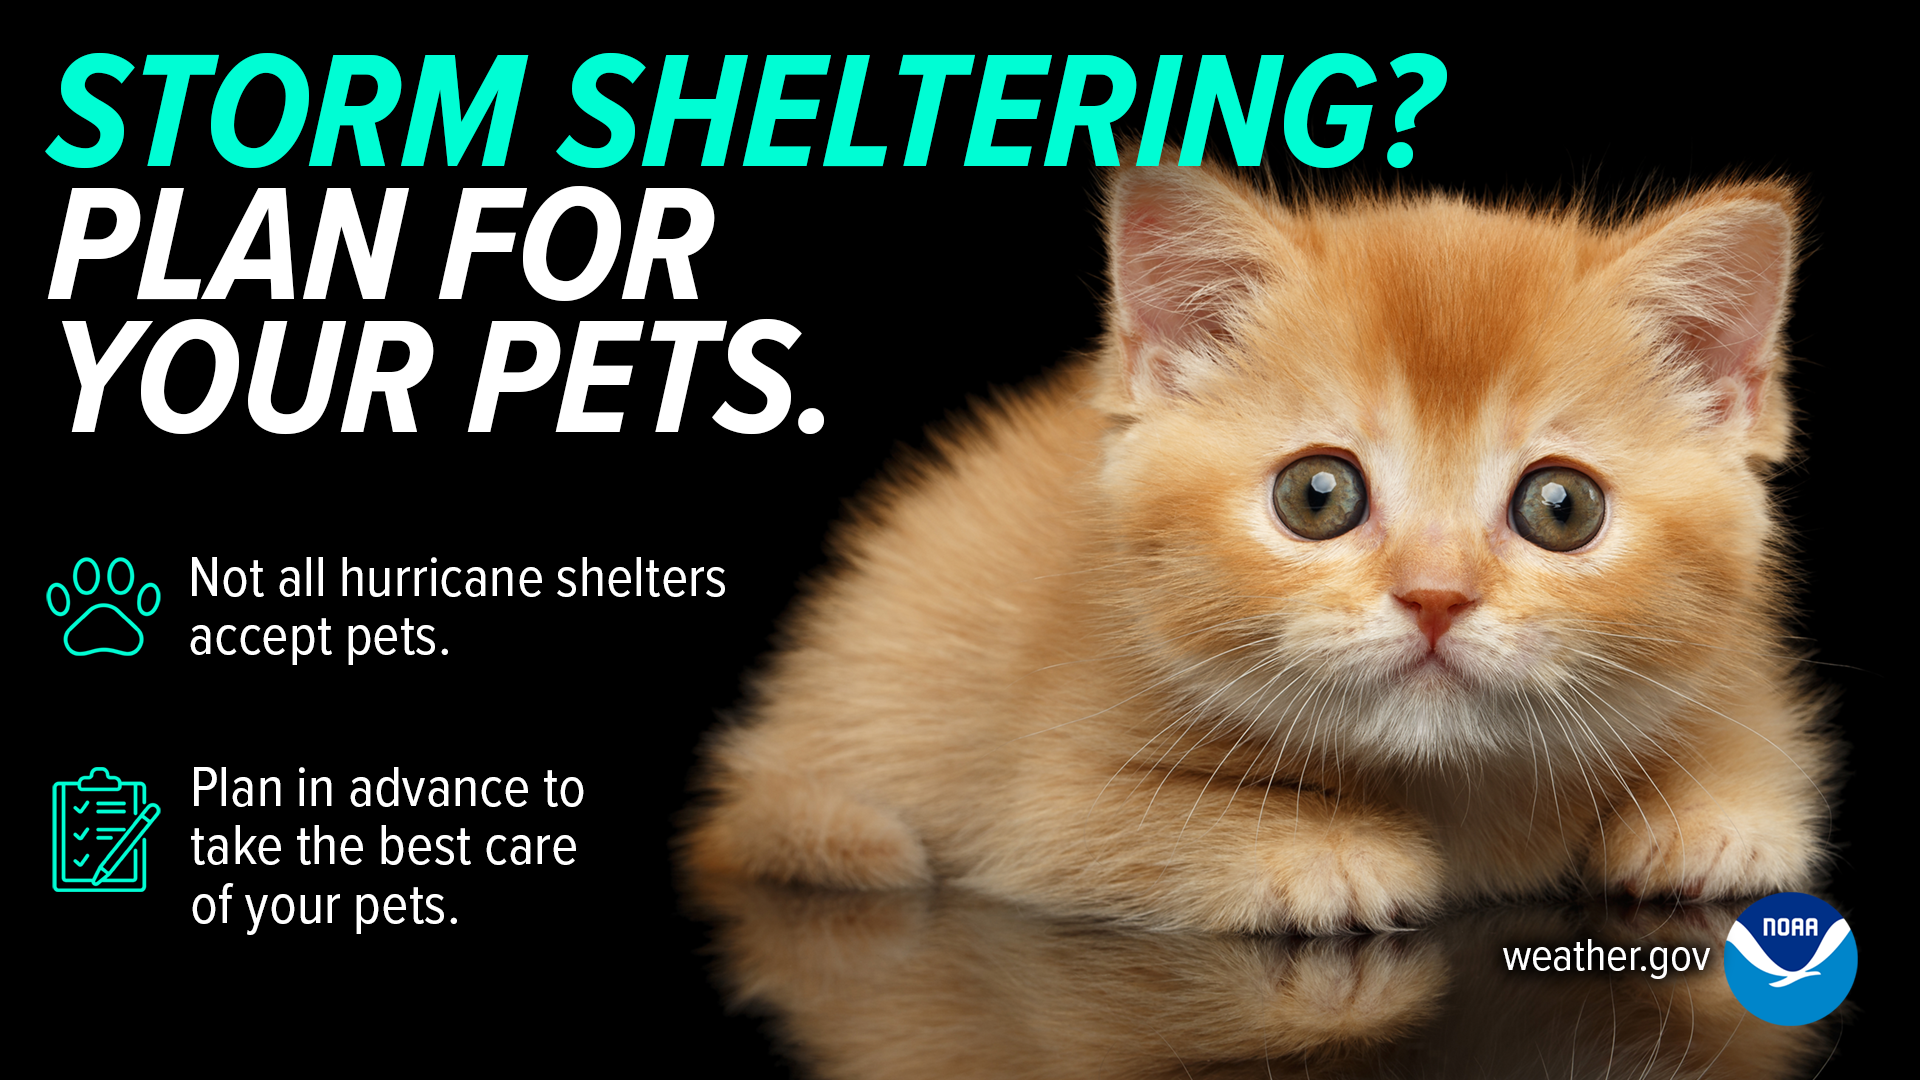 Storm sheltering? Plan for your pets. Not all hurricane shelters accept pets. Plan in advance to take the best care of your pets.